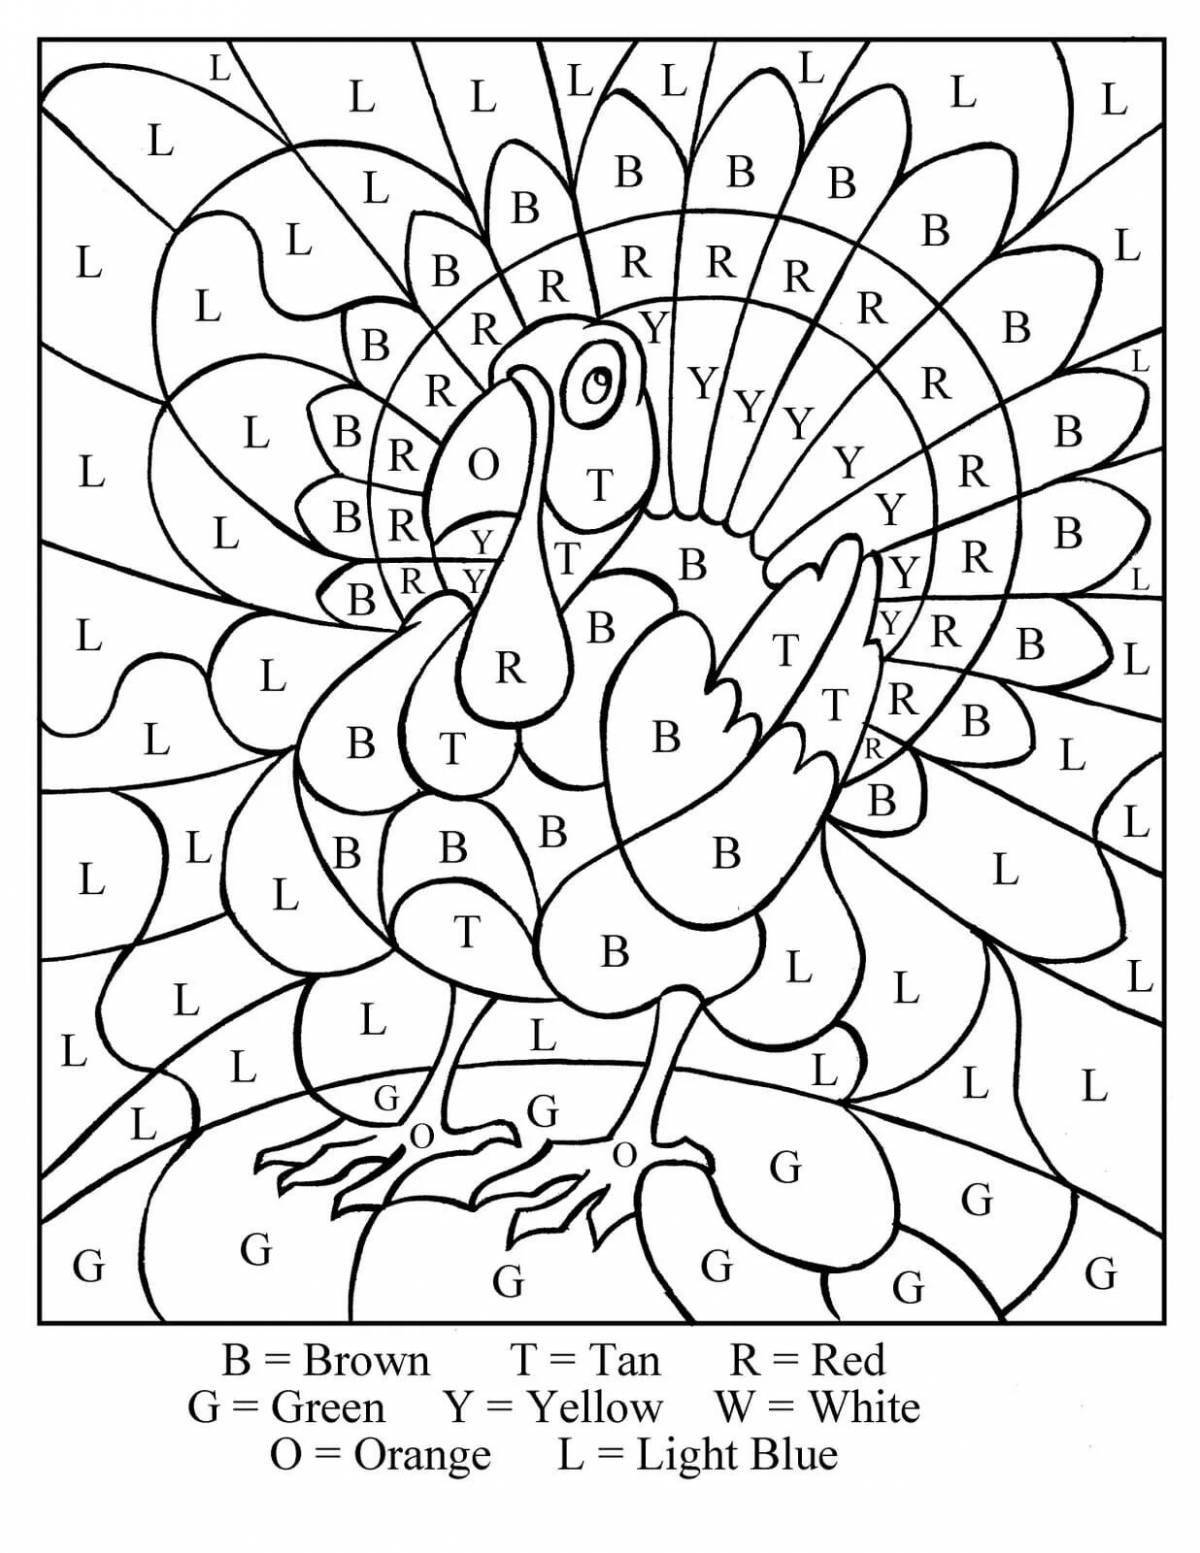 English by numbers coloring book